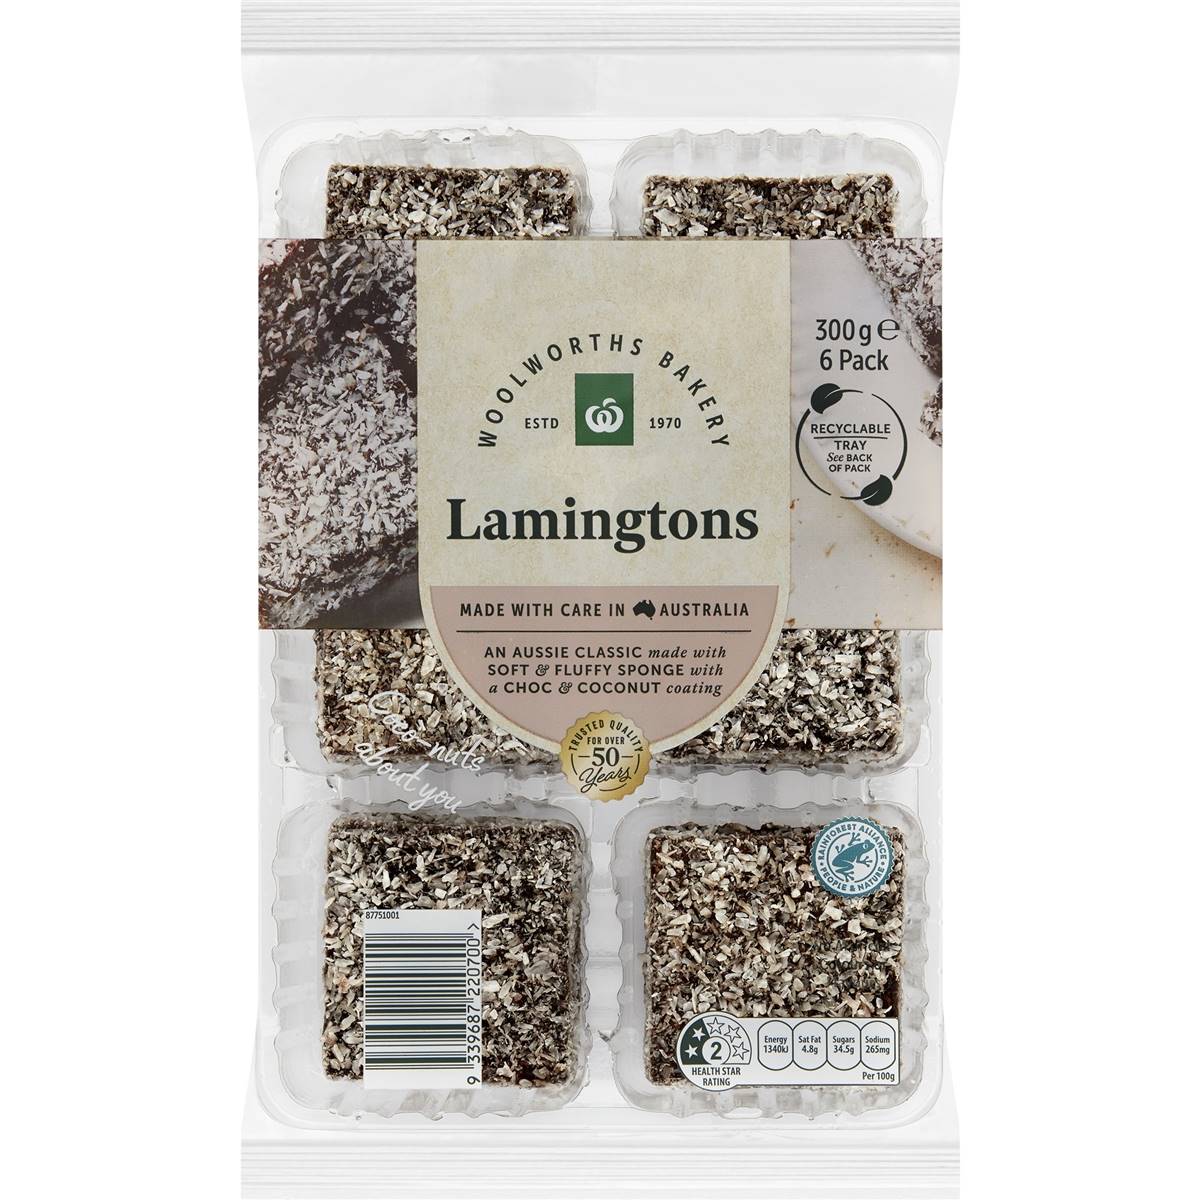 Calories in Woolworths Lamingtons